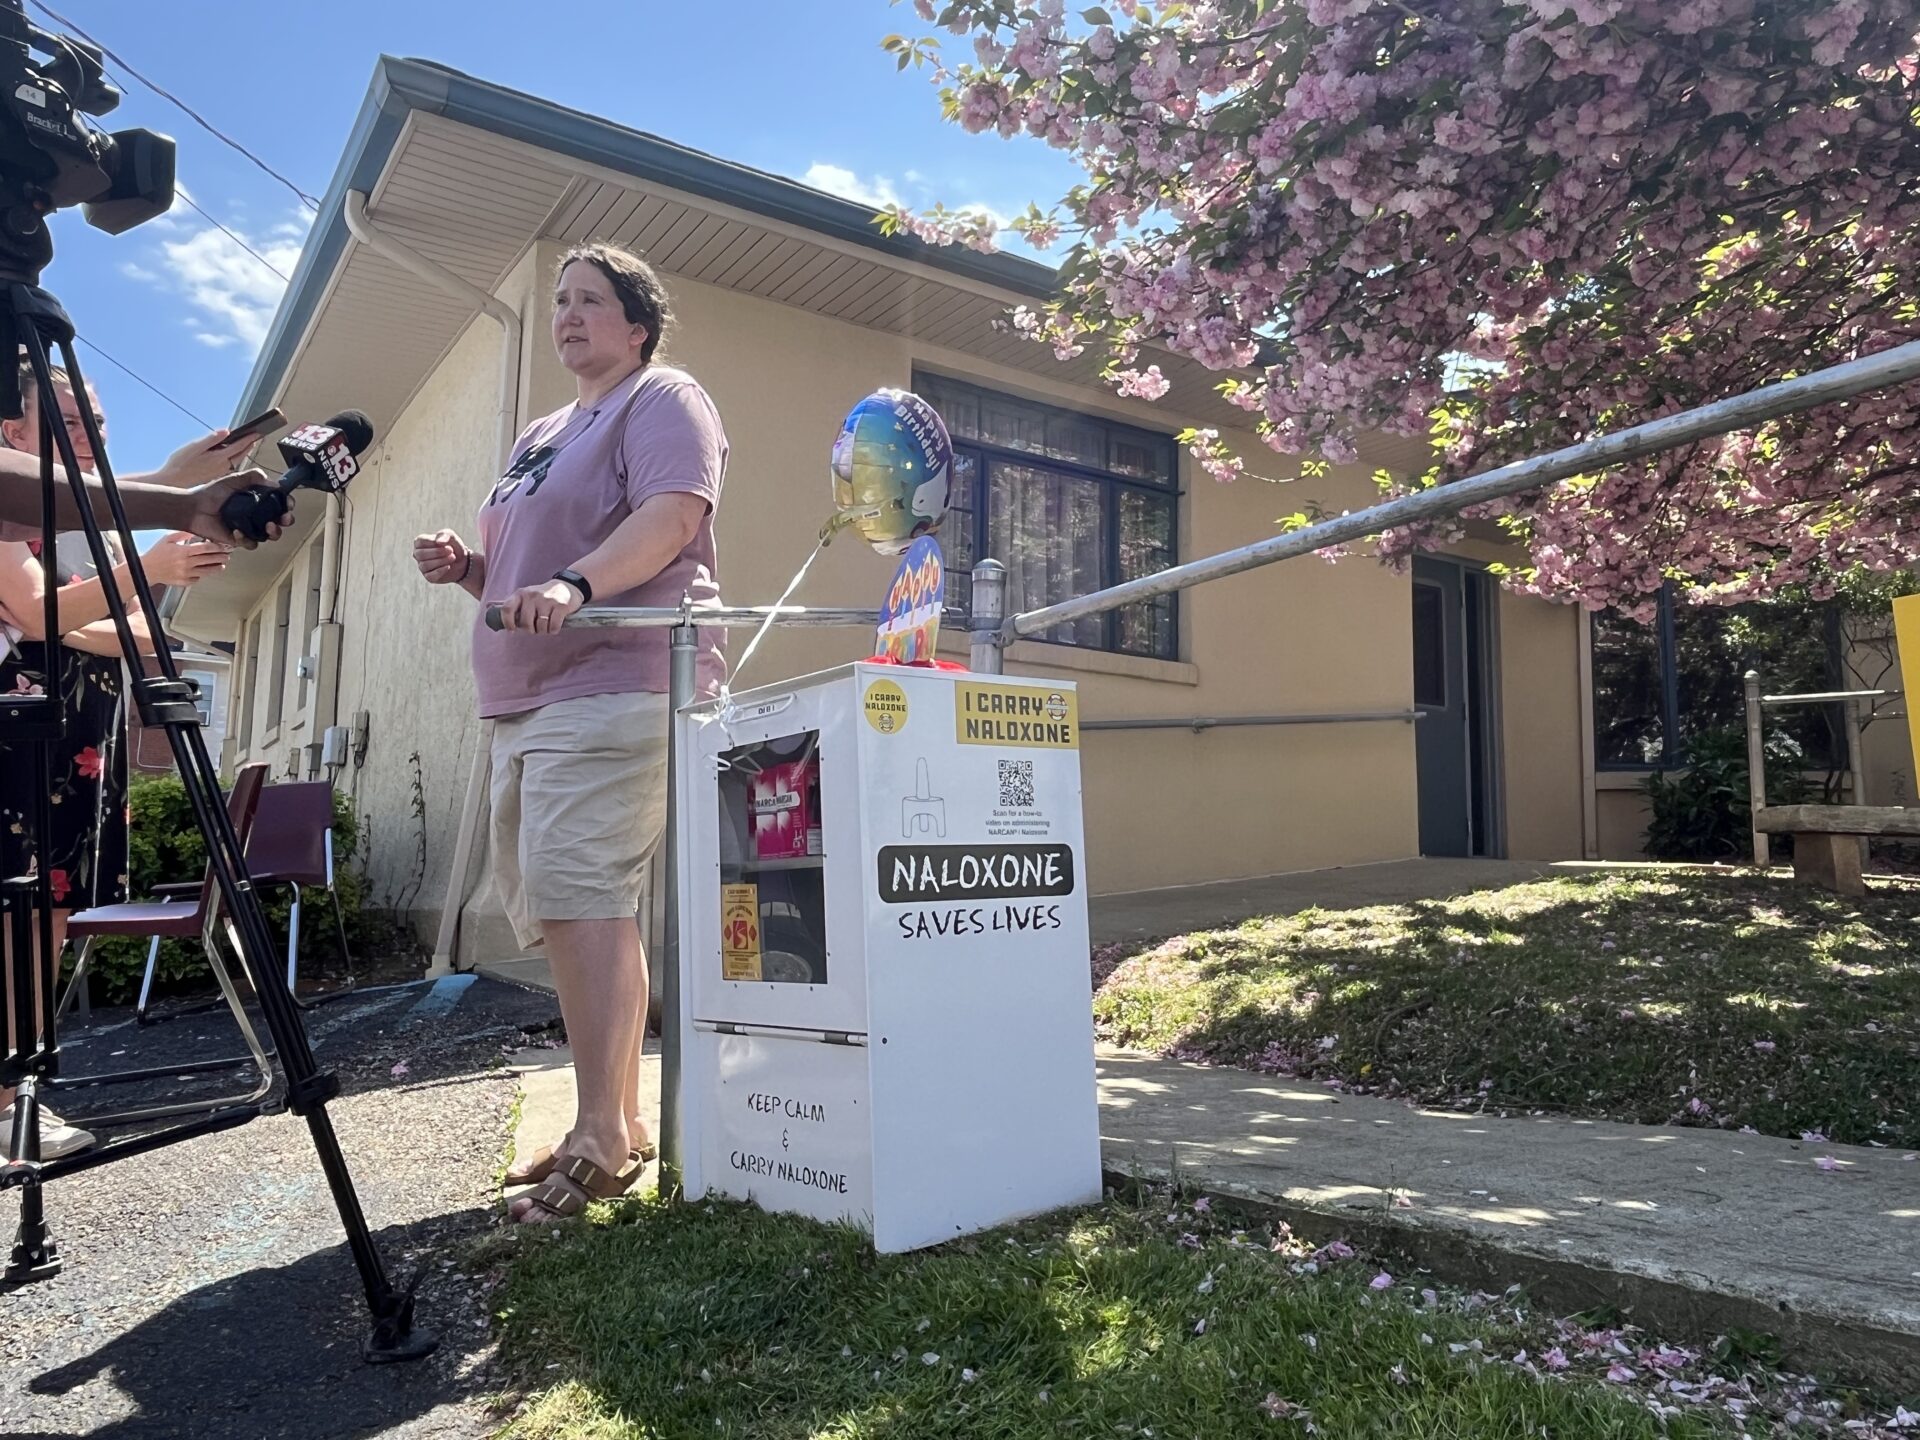 A woman wearing a pink shirt and tan shorts stands next to a newspaper box containing narcan. The box is white with a window out the front. The woman is surrounded by media interviewing her about the box.